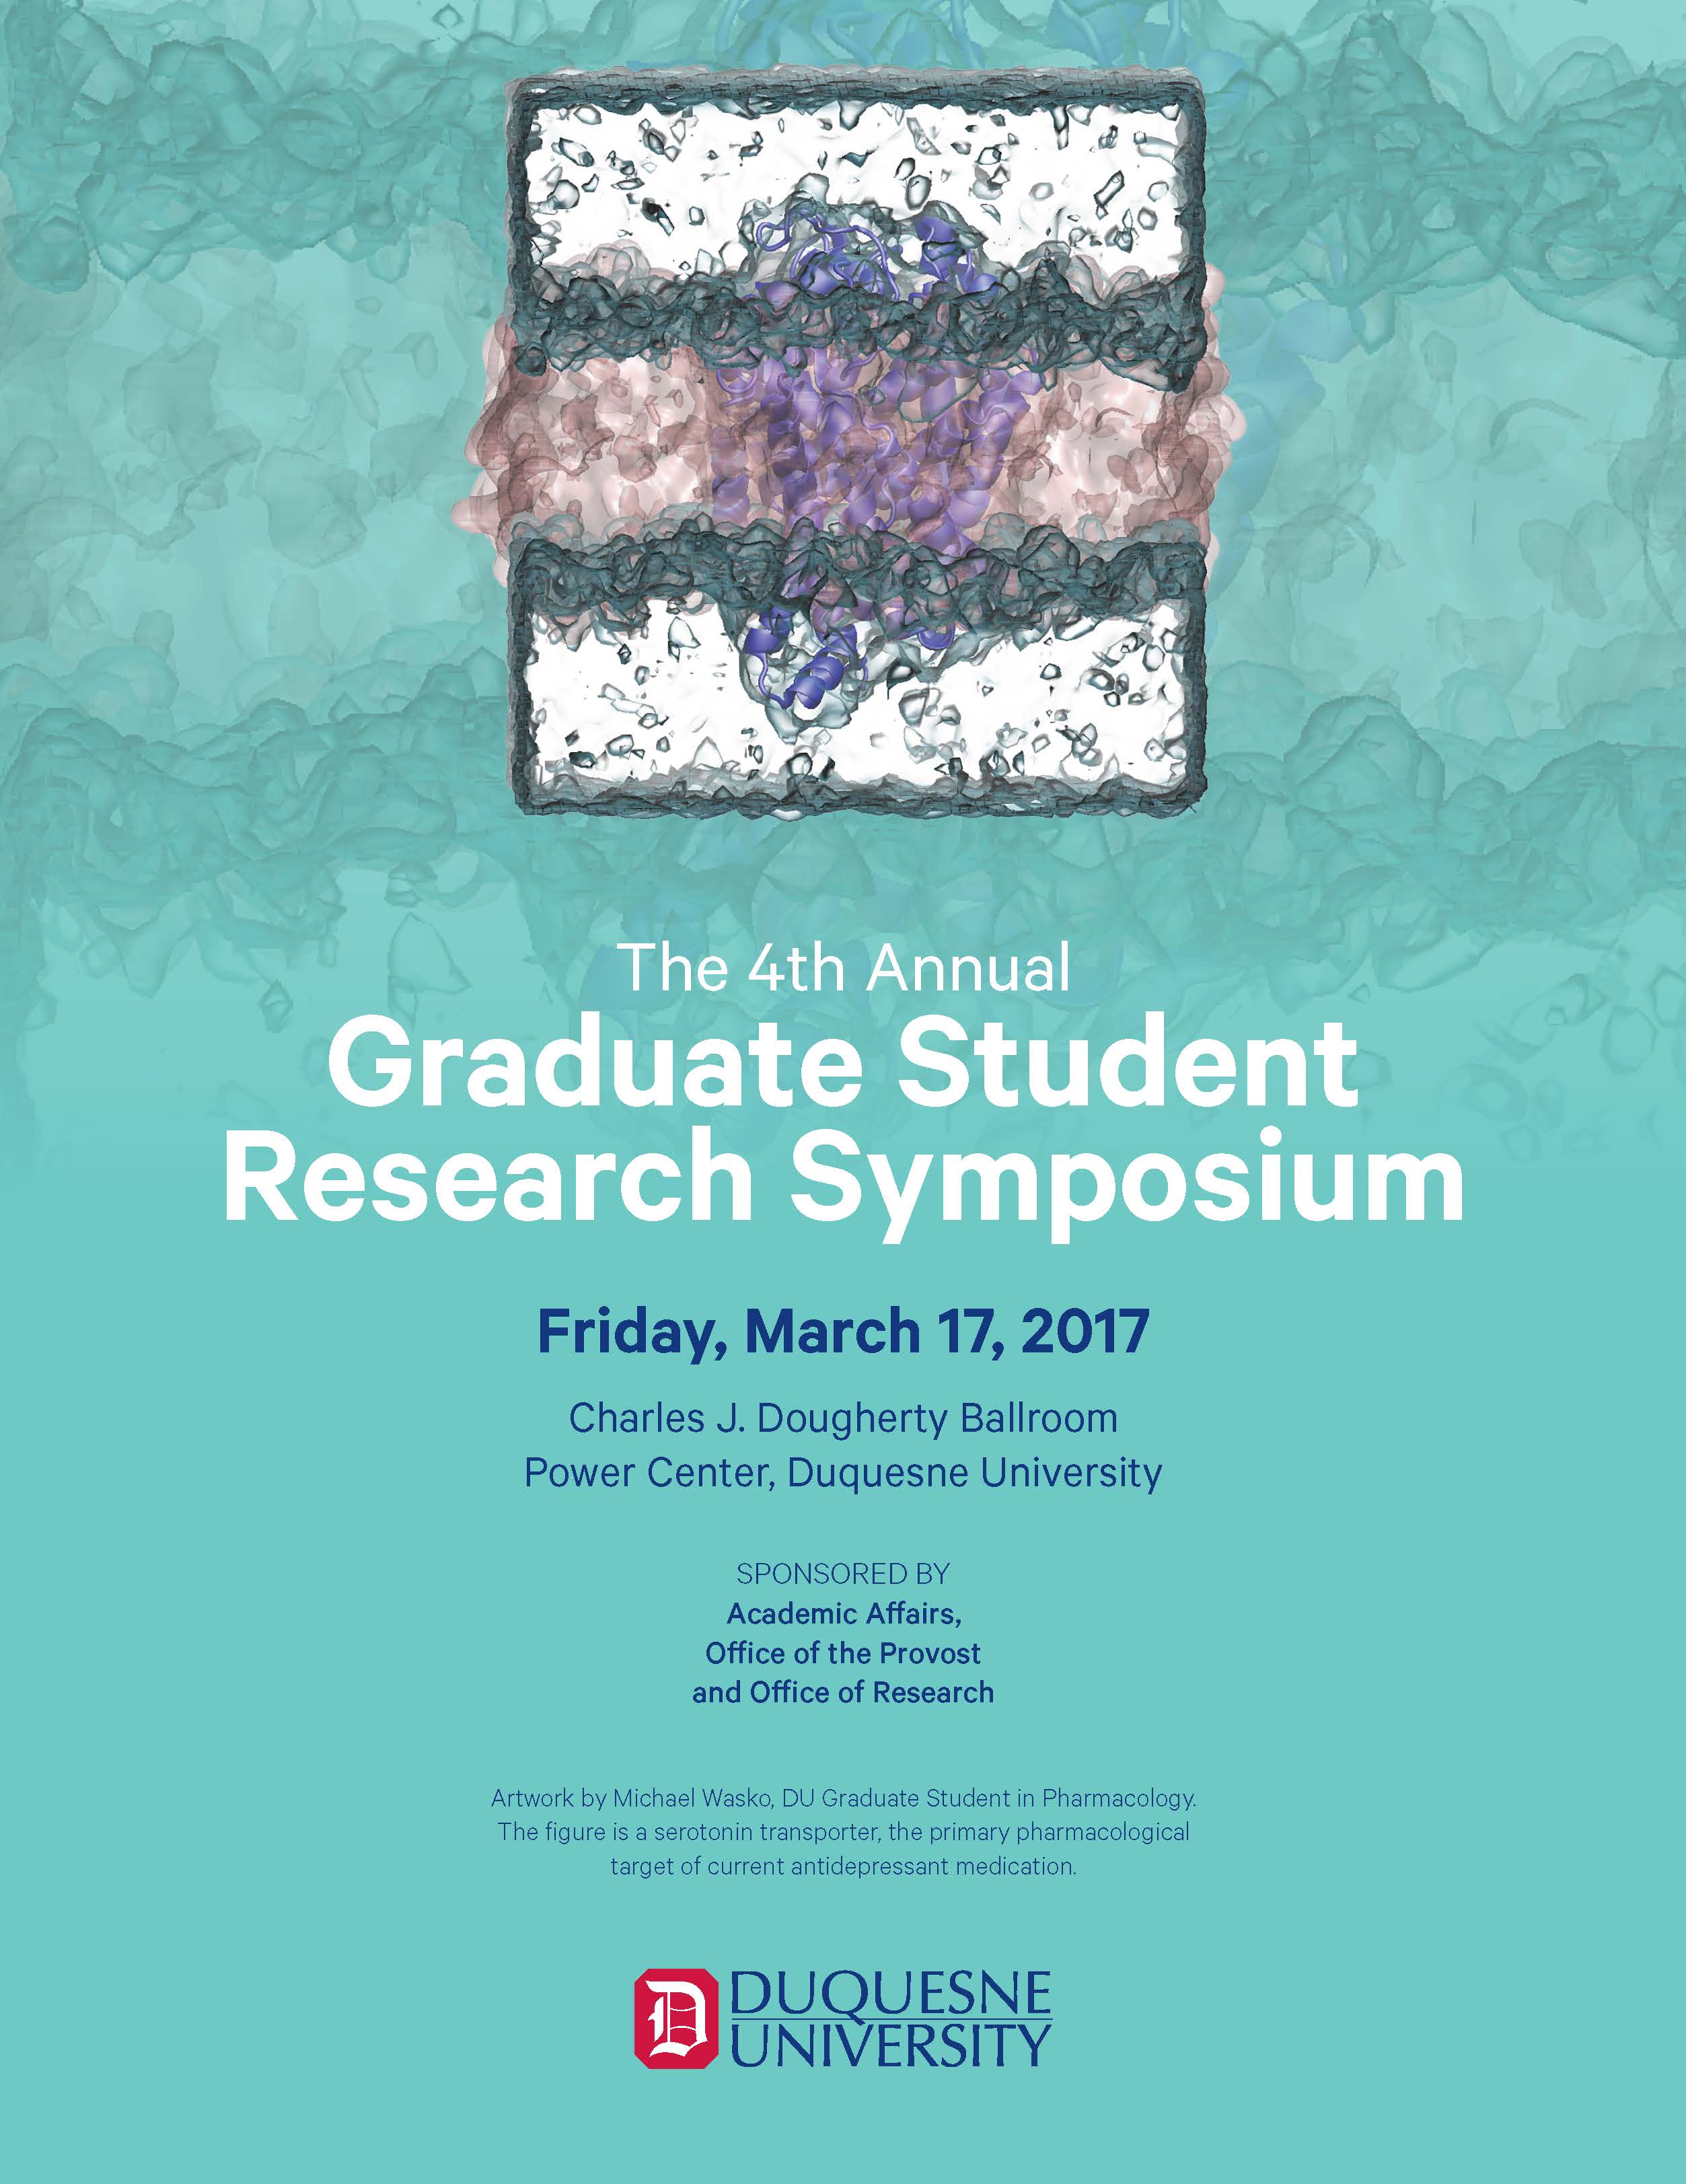 The 4th Annual Graduate Student Research Symposium